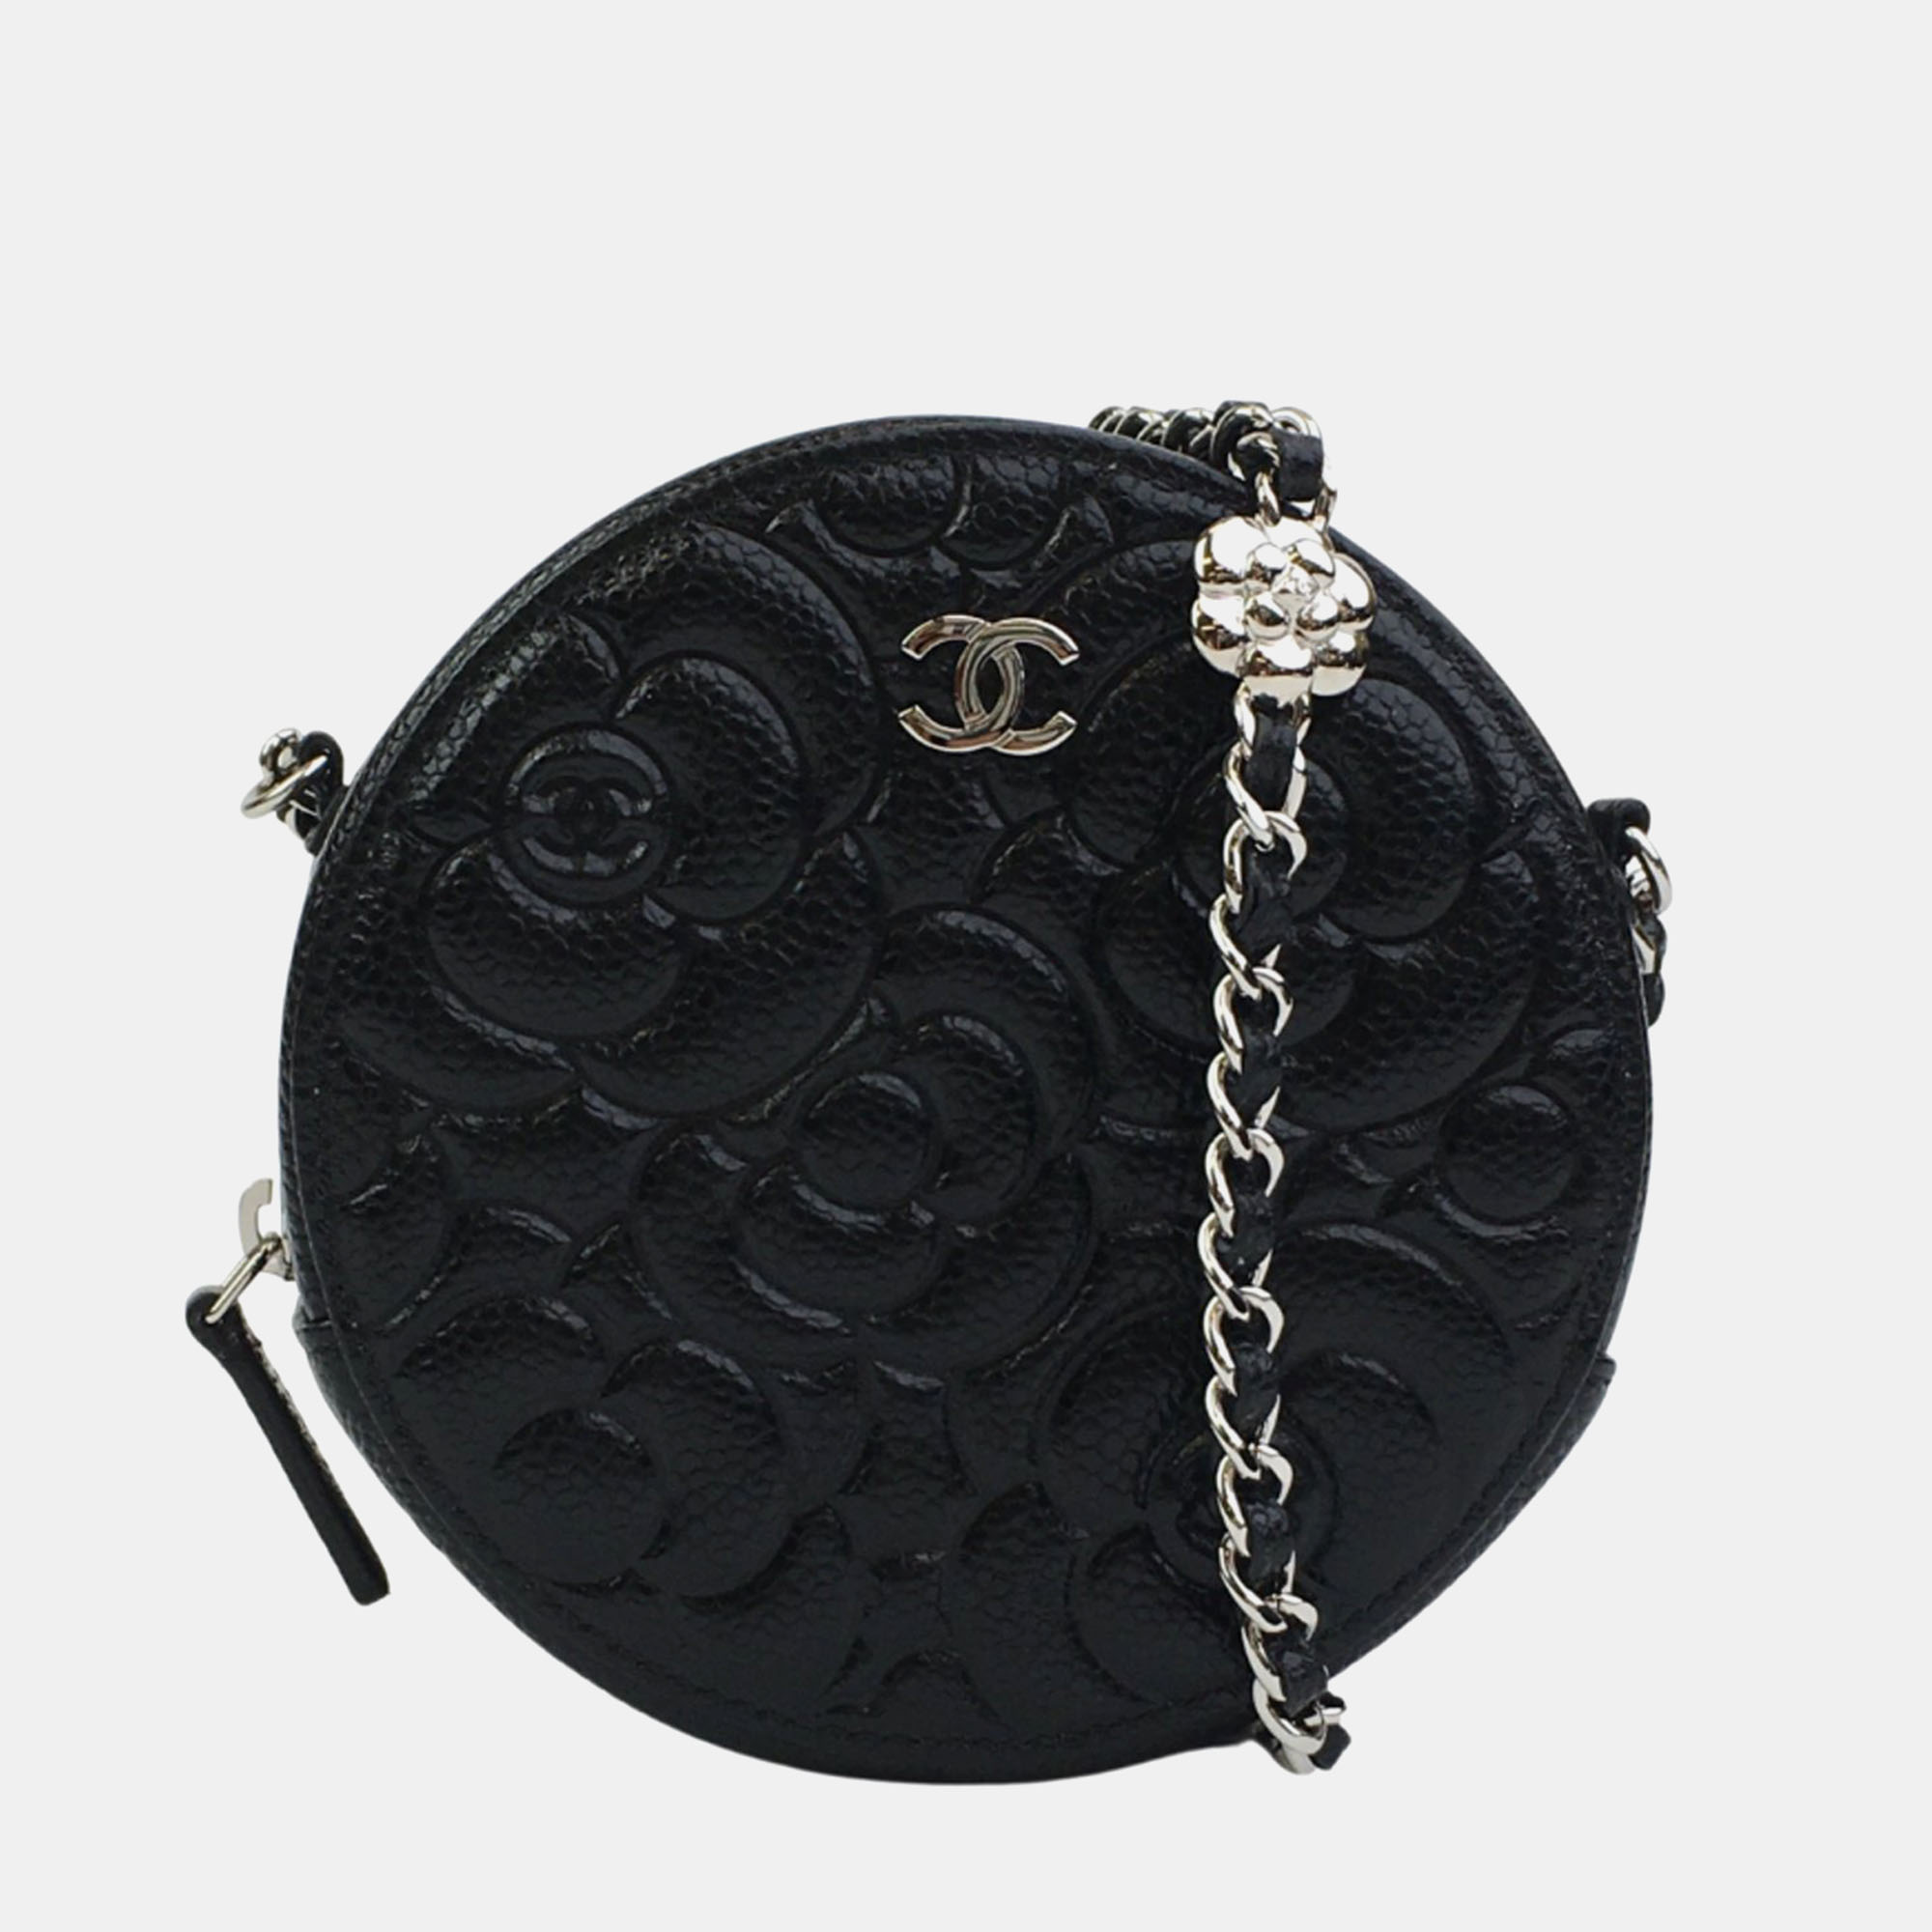 

Chanel Black Leather Round Camellia Clutch